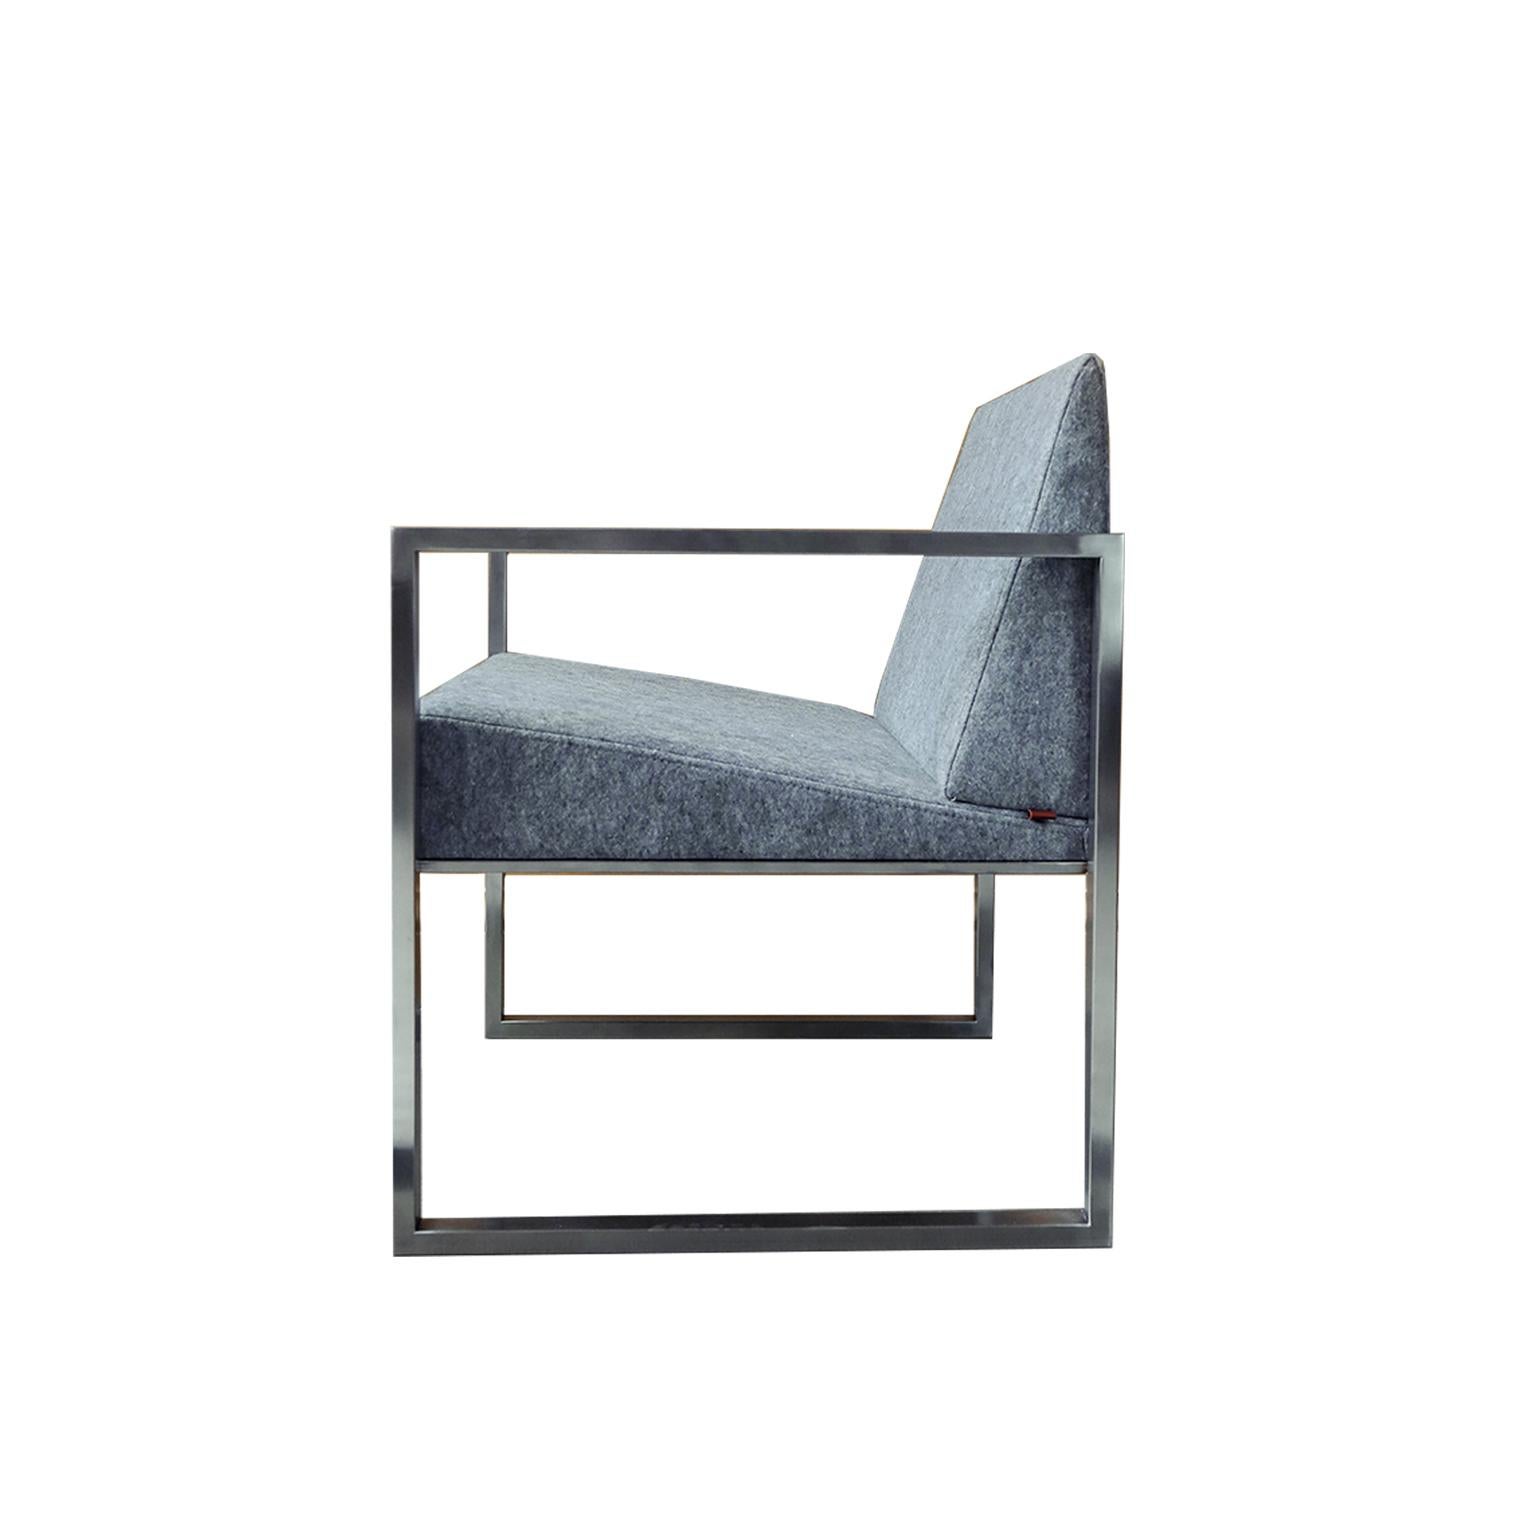 Rec armchair that you will enjoy using in your living room, offices or waiting areas with its matte chrome square form design as well as its long-lasting and durable felt fabric...

Measures: length: 26'' / depth: 22.8'' / height: 28.4'' / seat